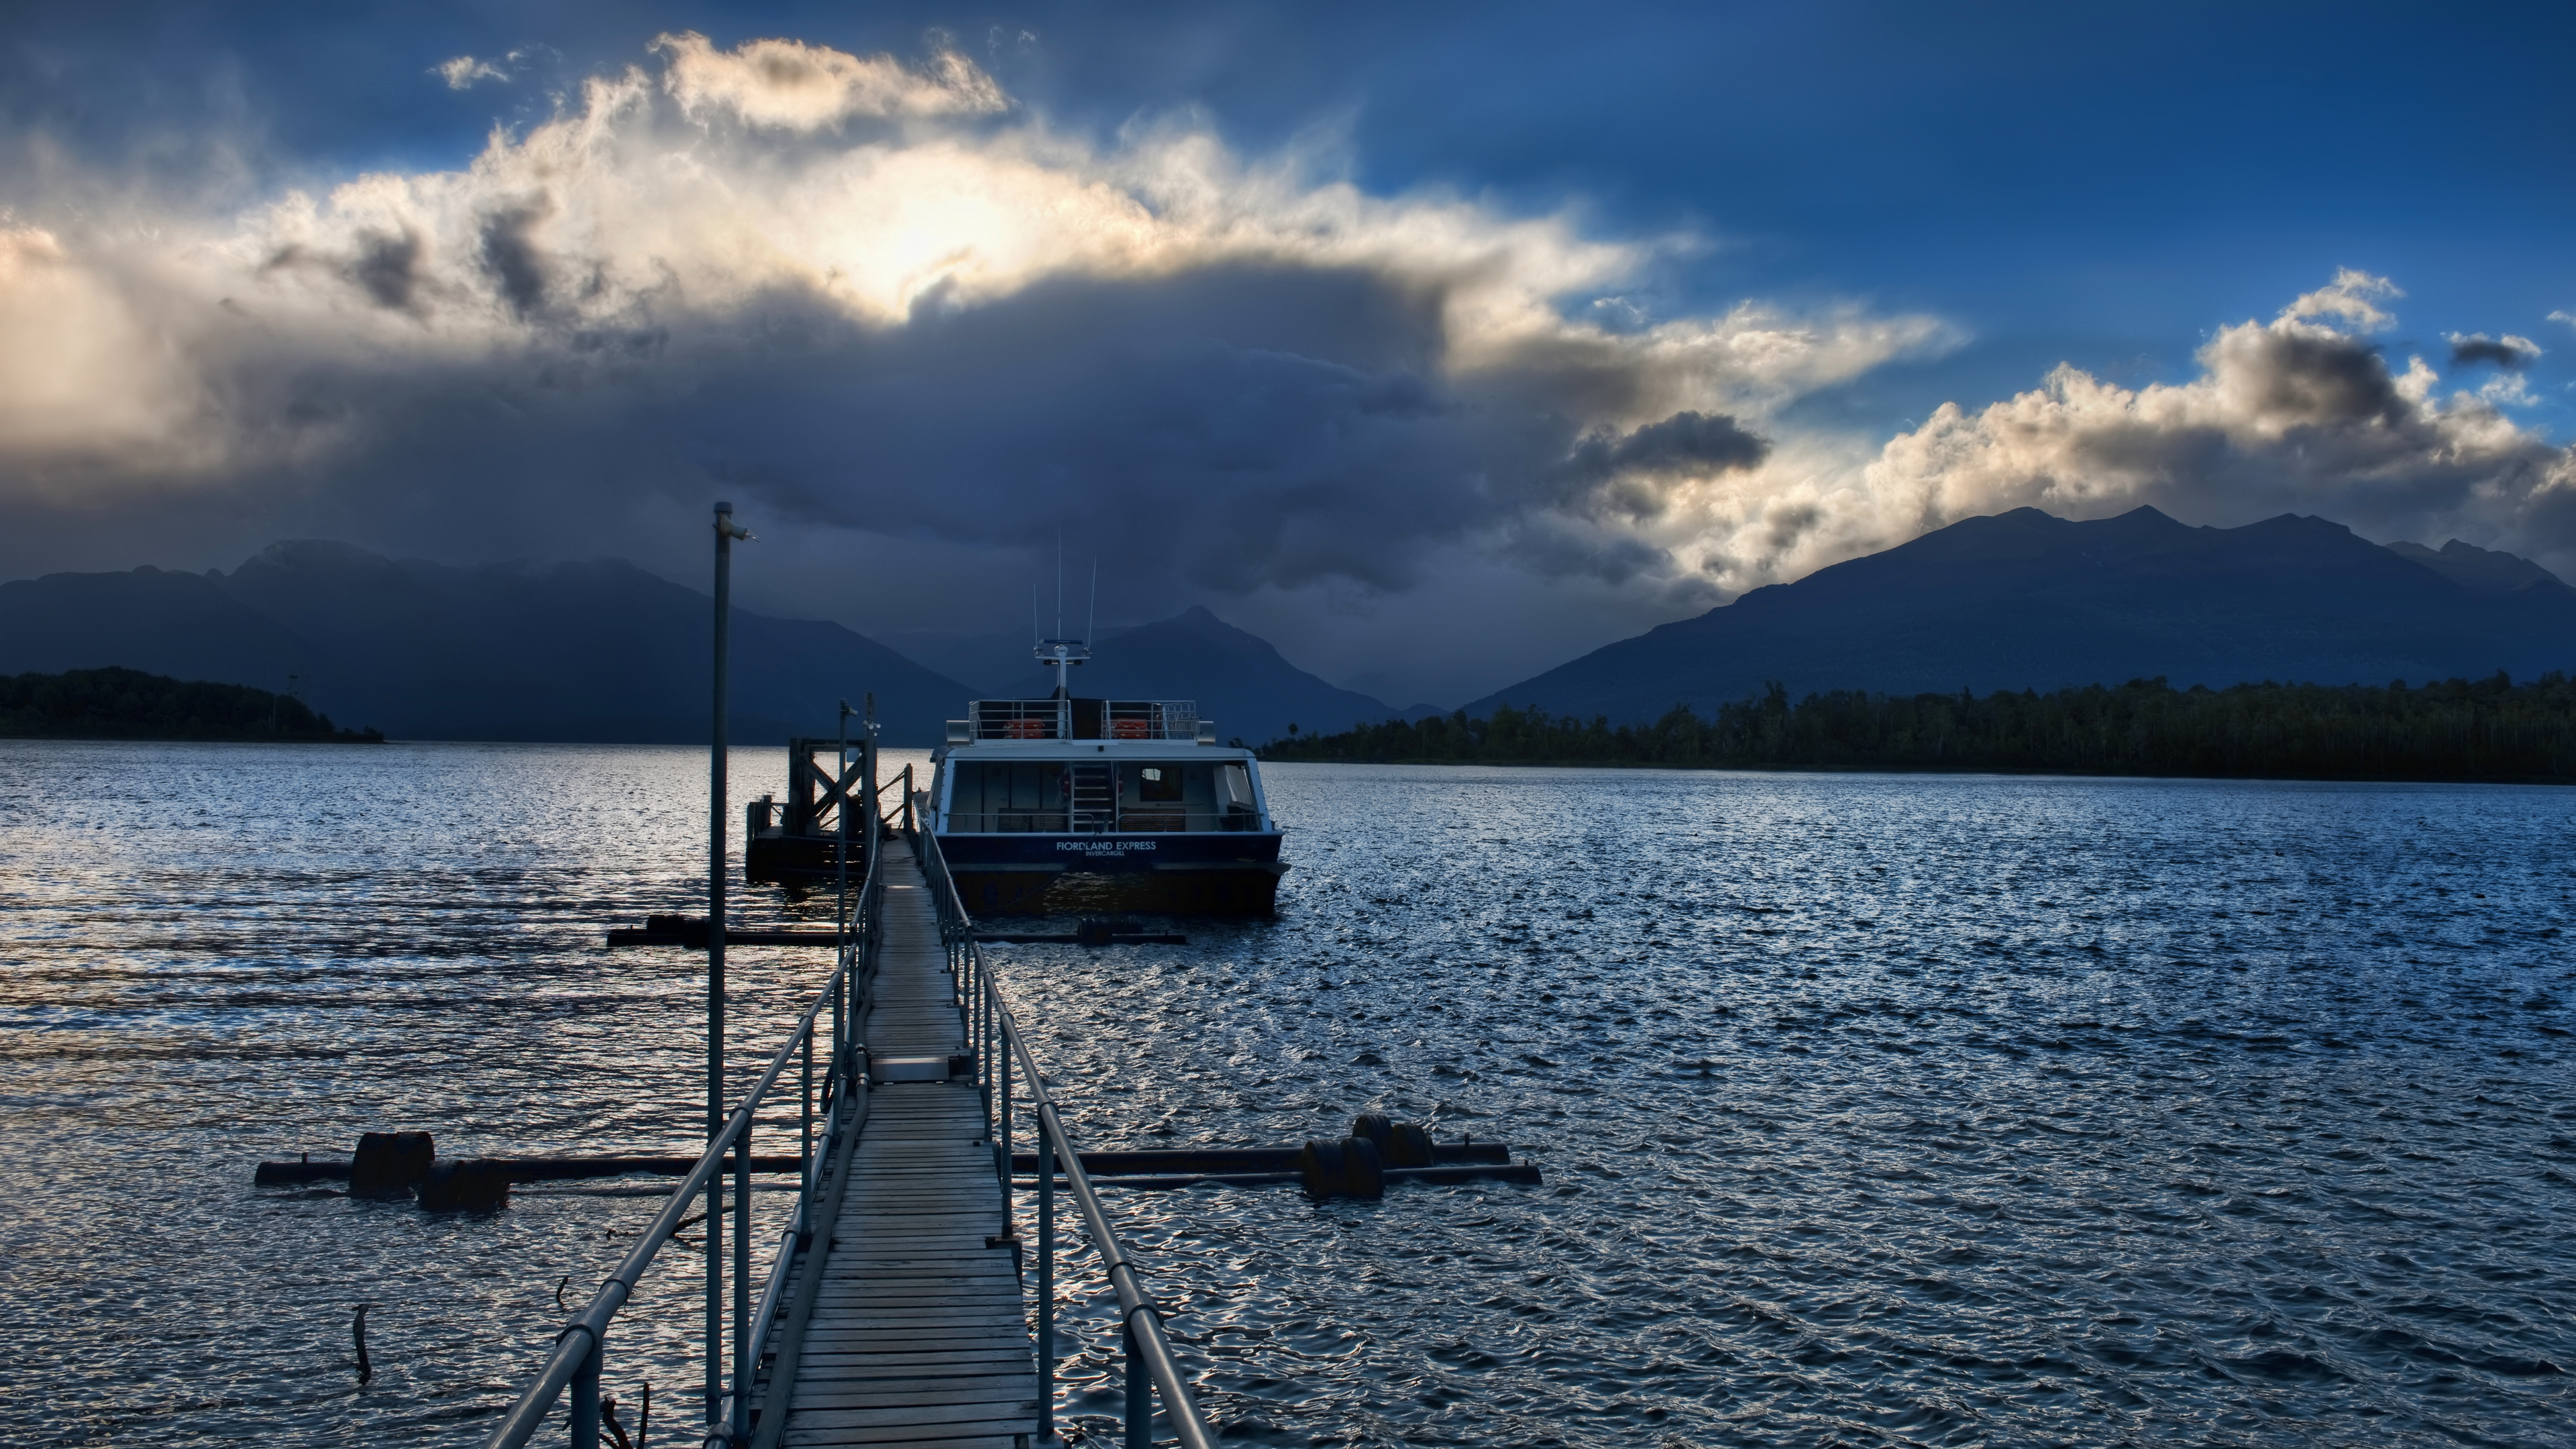 General 3840x2160 Trey Ratcliff photography water nature mountains clouds sky jetty